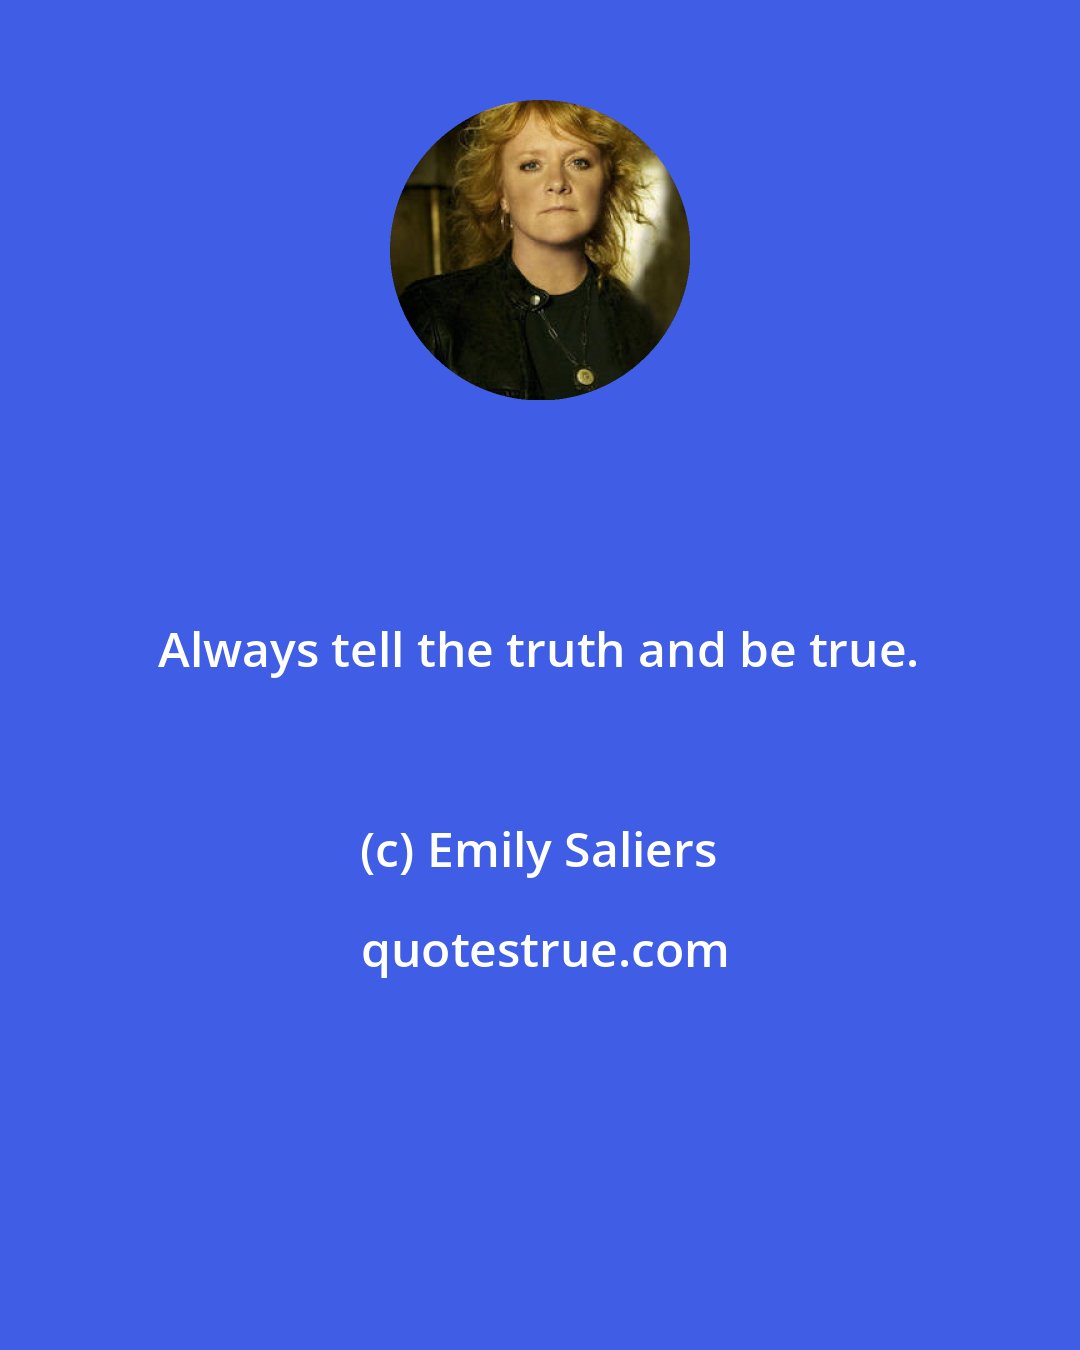 Emily Saliers: Always tell the truth and be true.